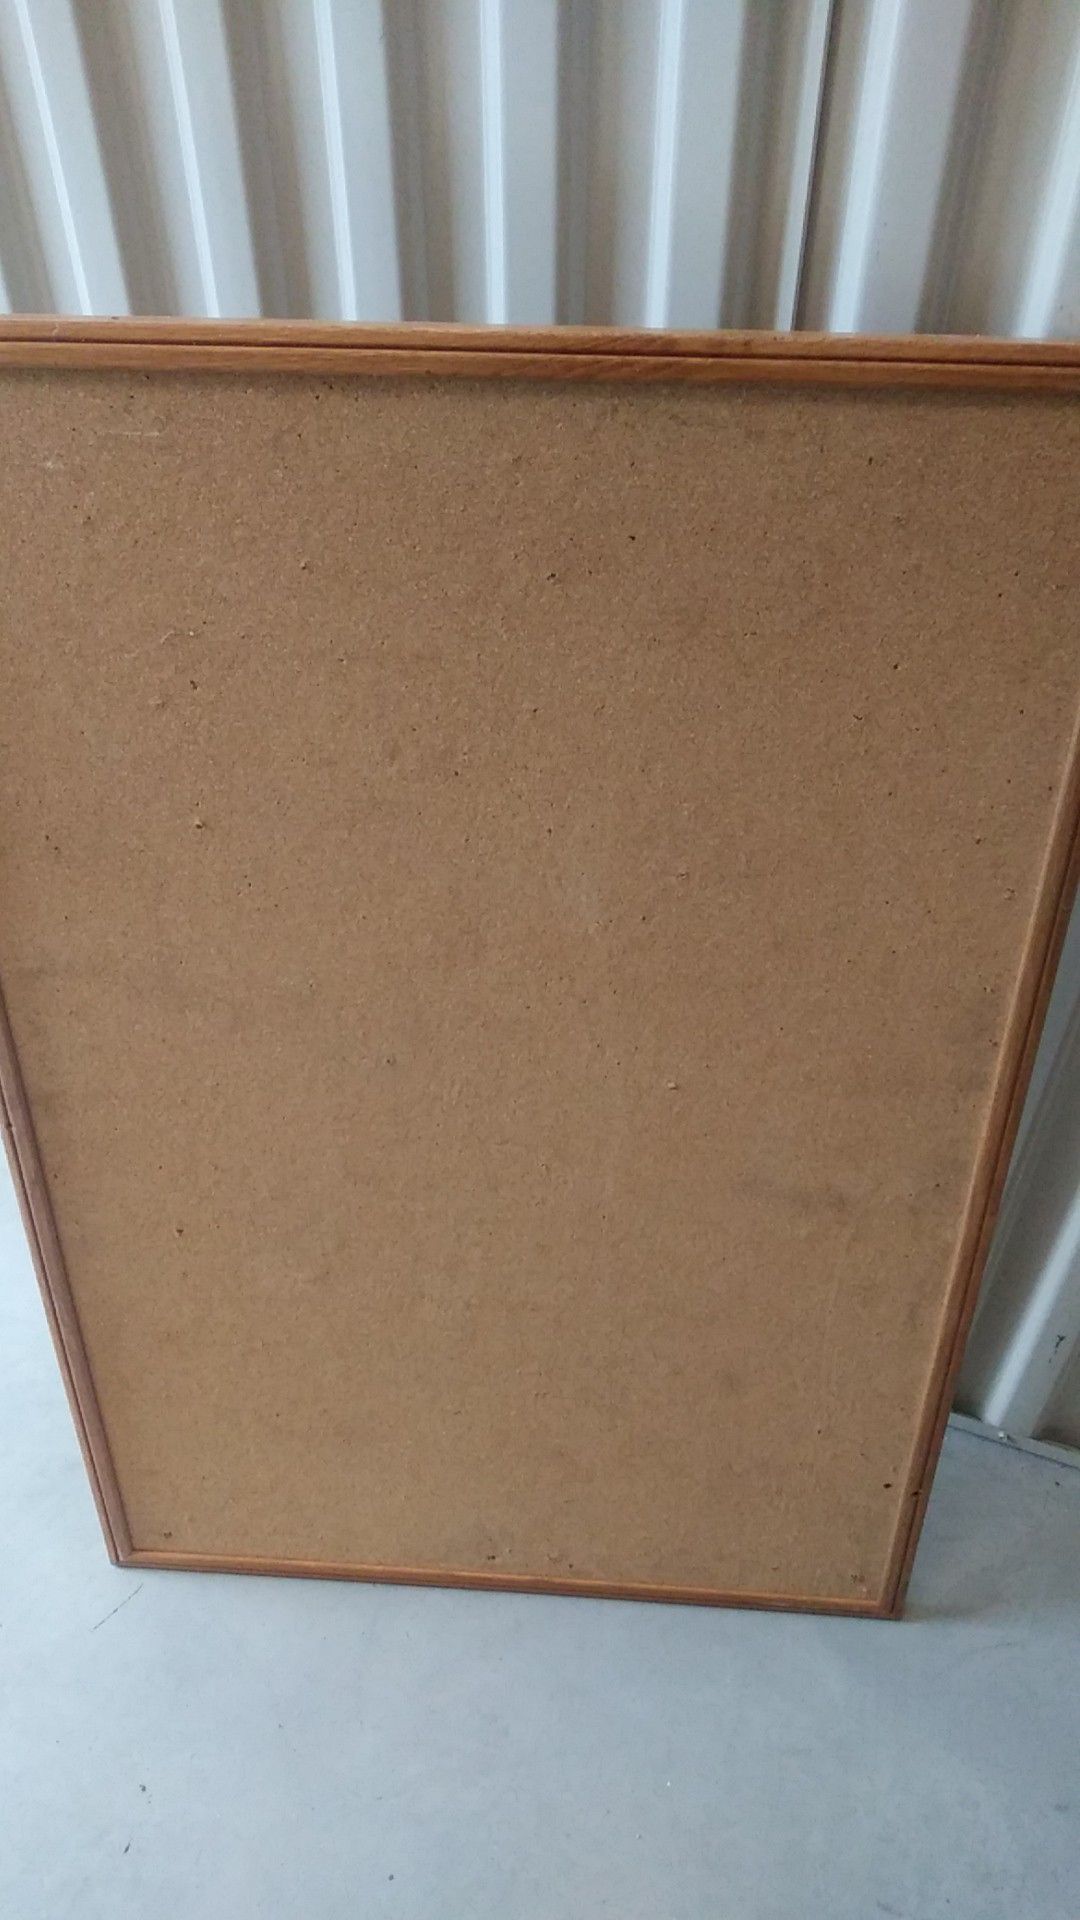 Free 36" x 24" Cork Board Pick up Only